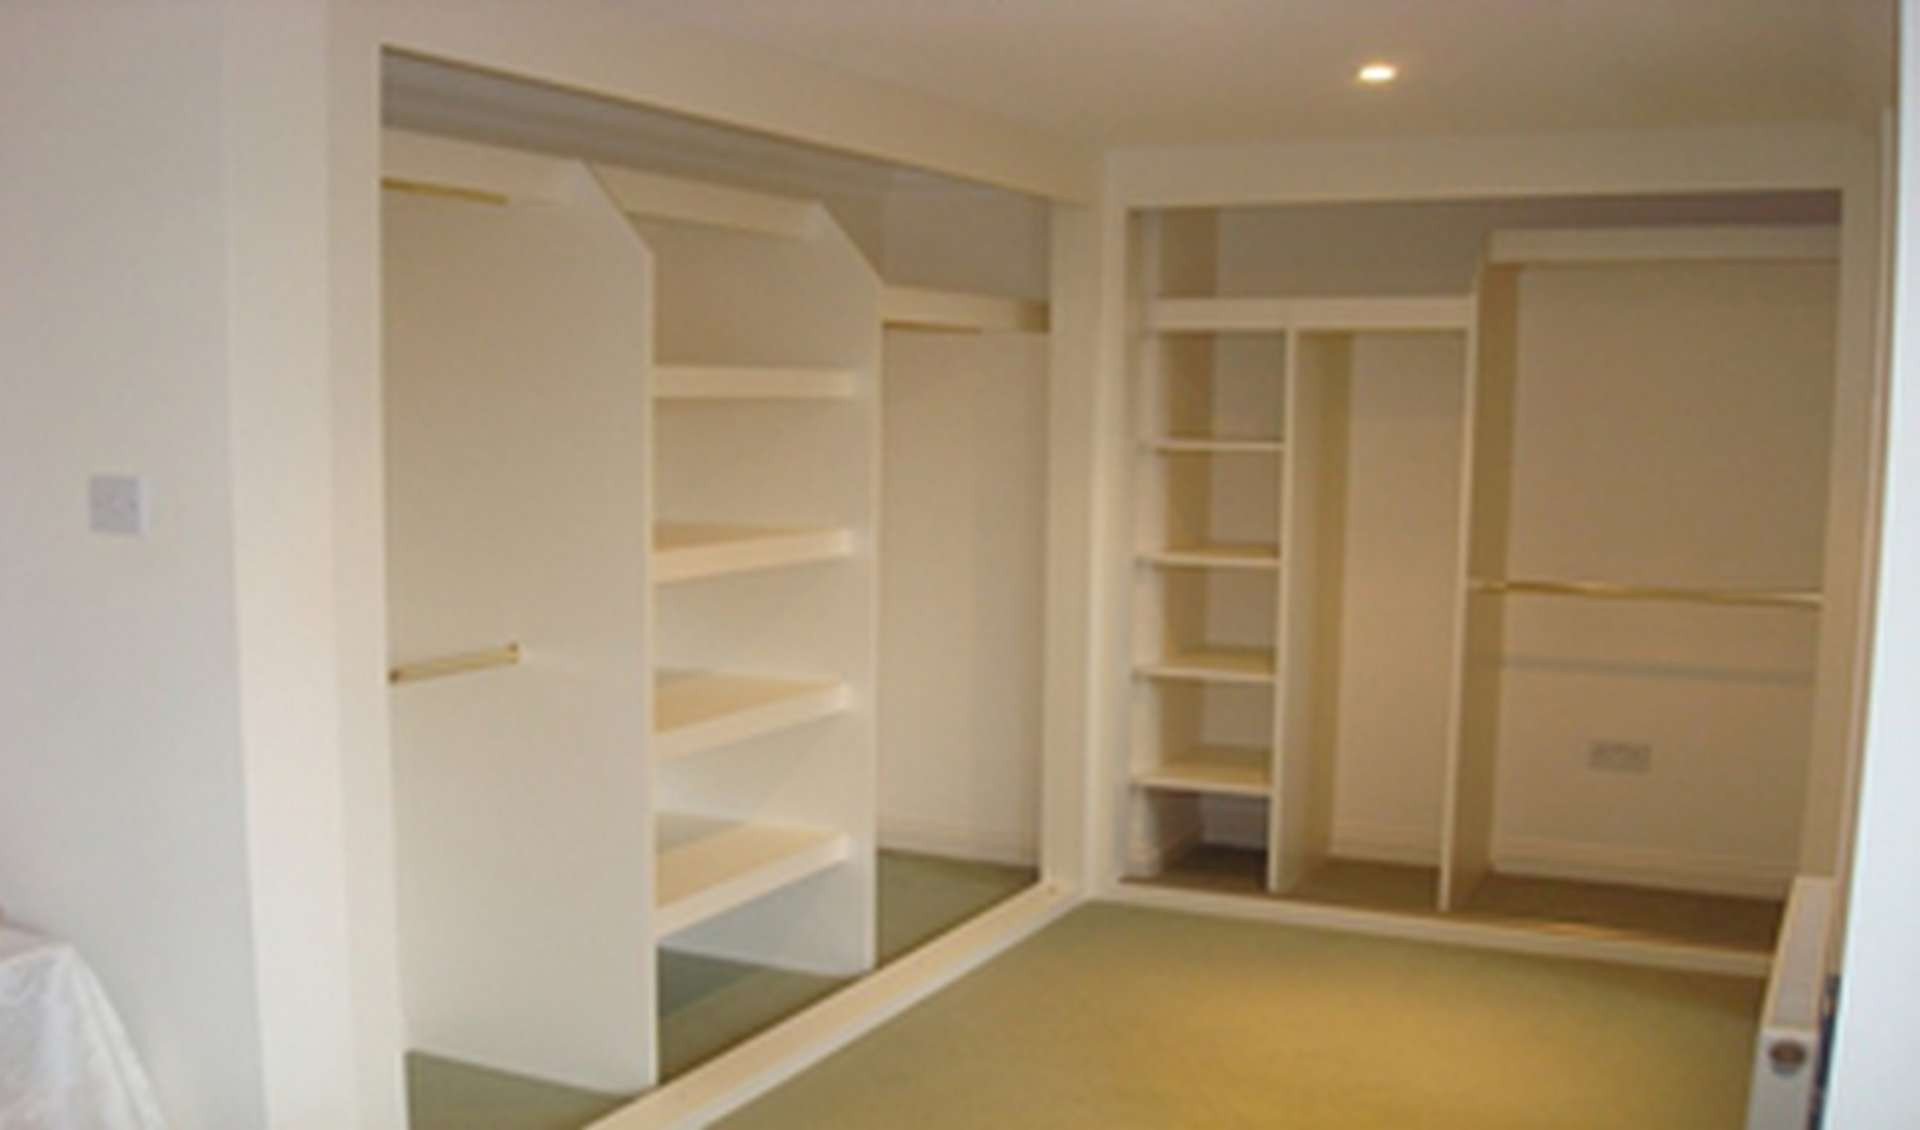 Bedroom Storage Solutions
 Fitted storage solutions